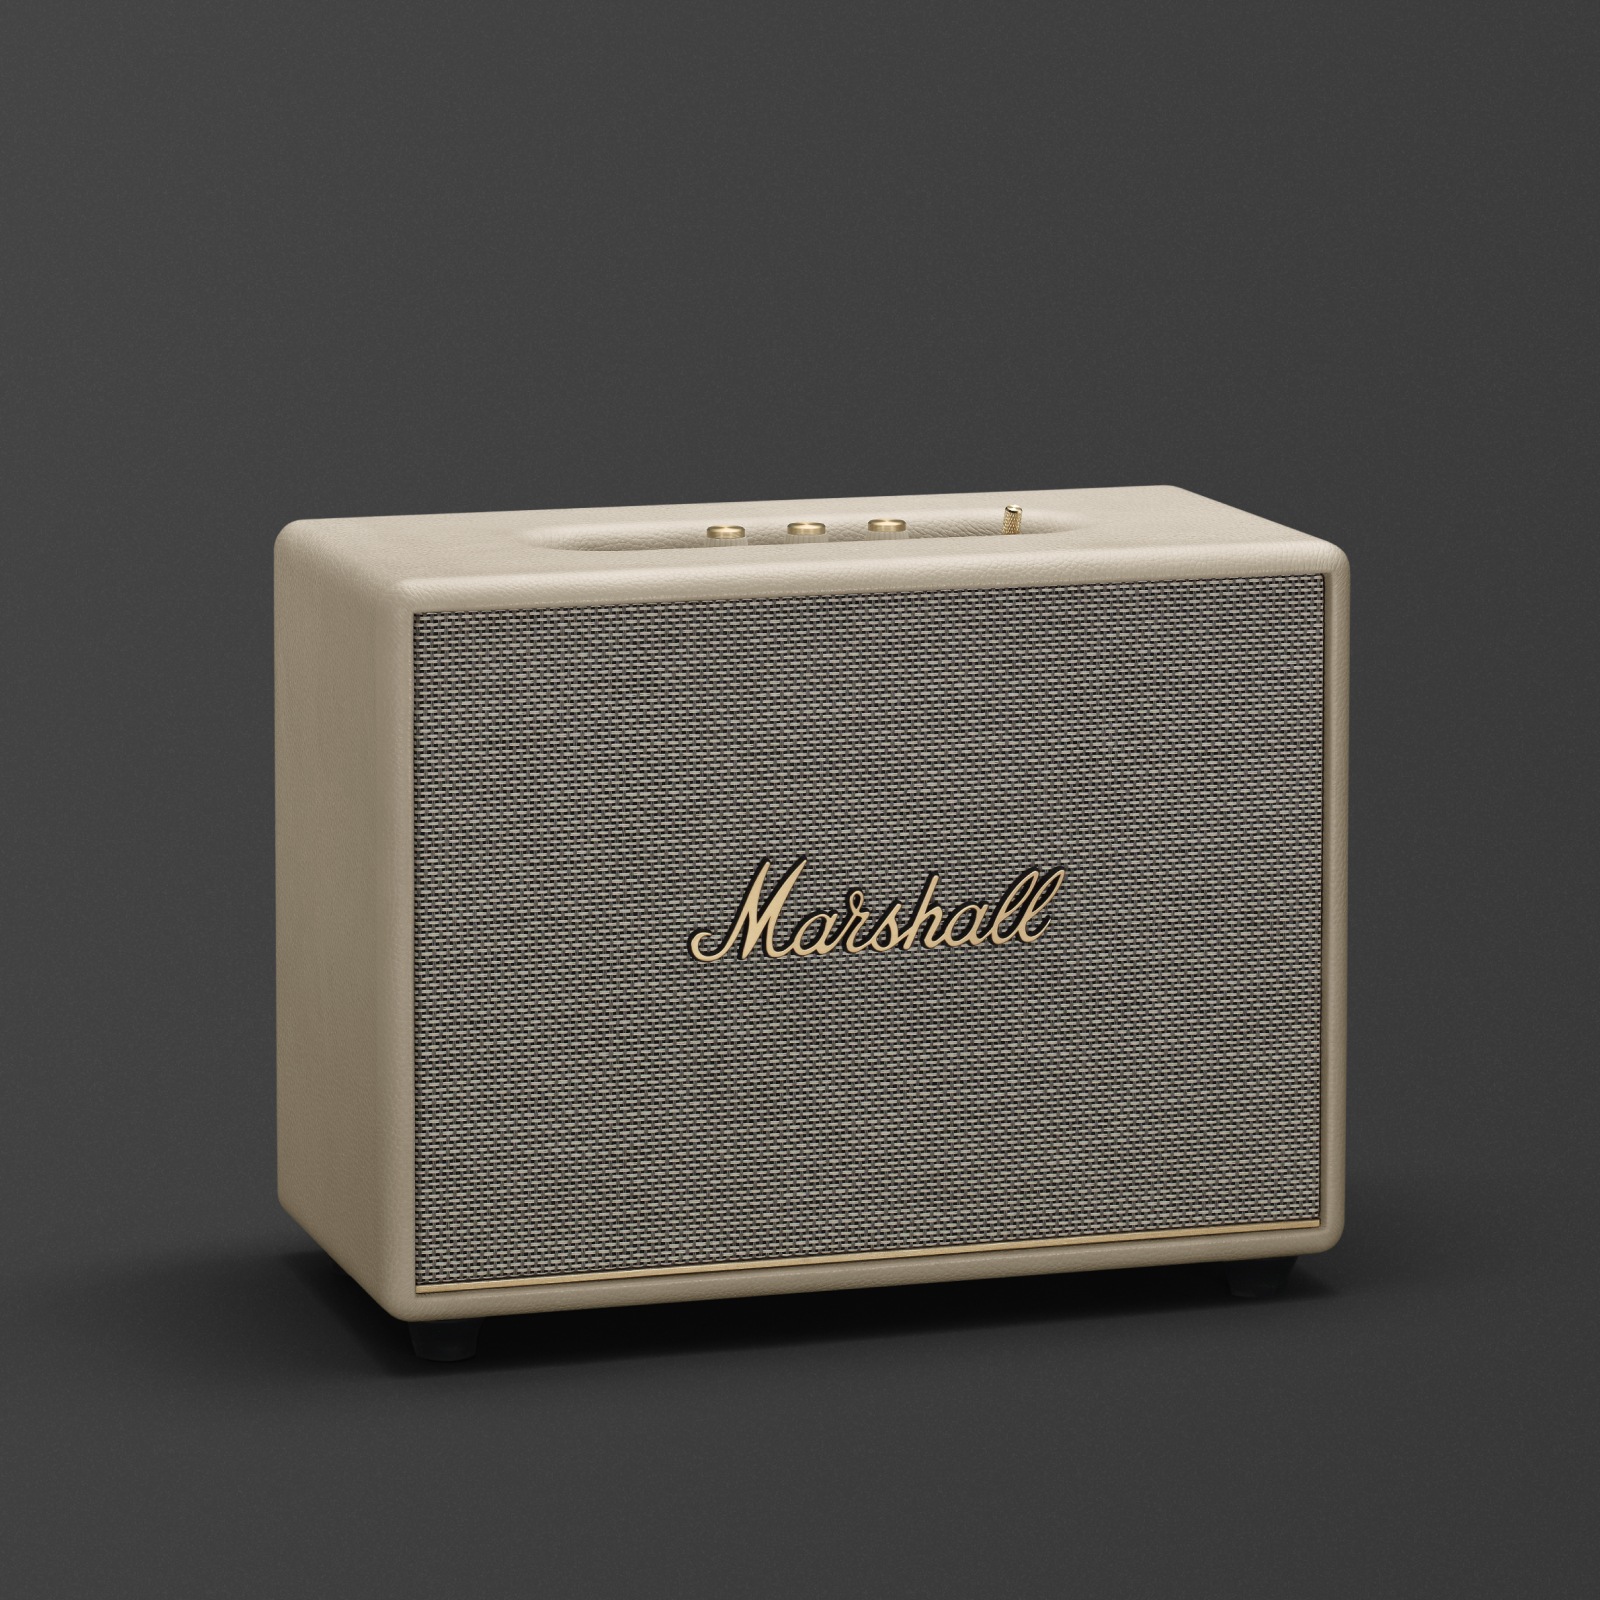 Marshall Woburn III Cream Bluetooth Speaker. This Marshall home speaker, also available in white, is the Woburn III Cream model.